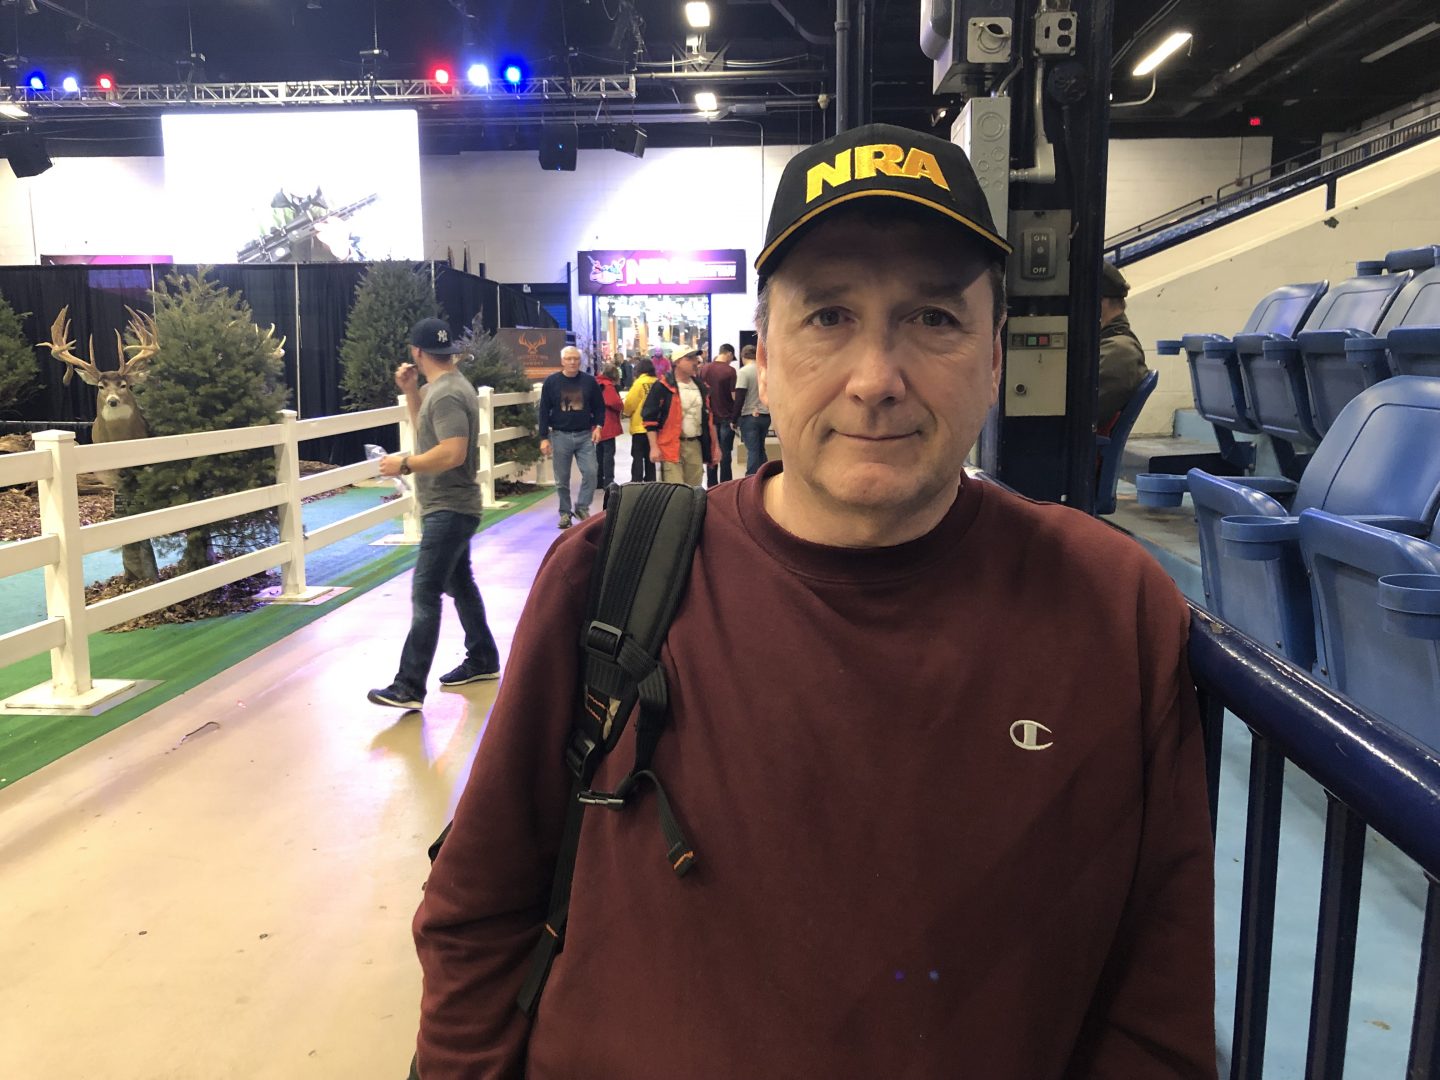 Frank Menendez, 54, of Long Island, New York, joined the NRA at the Great American Outdoor Show in Harrisburg.